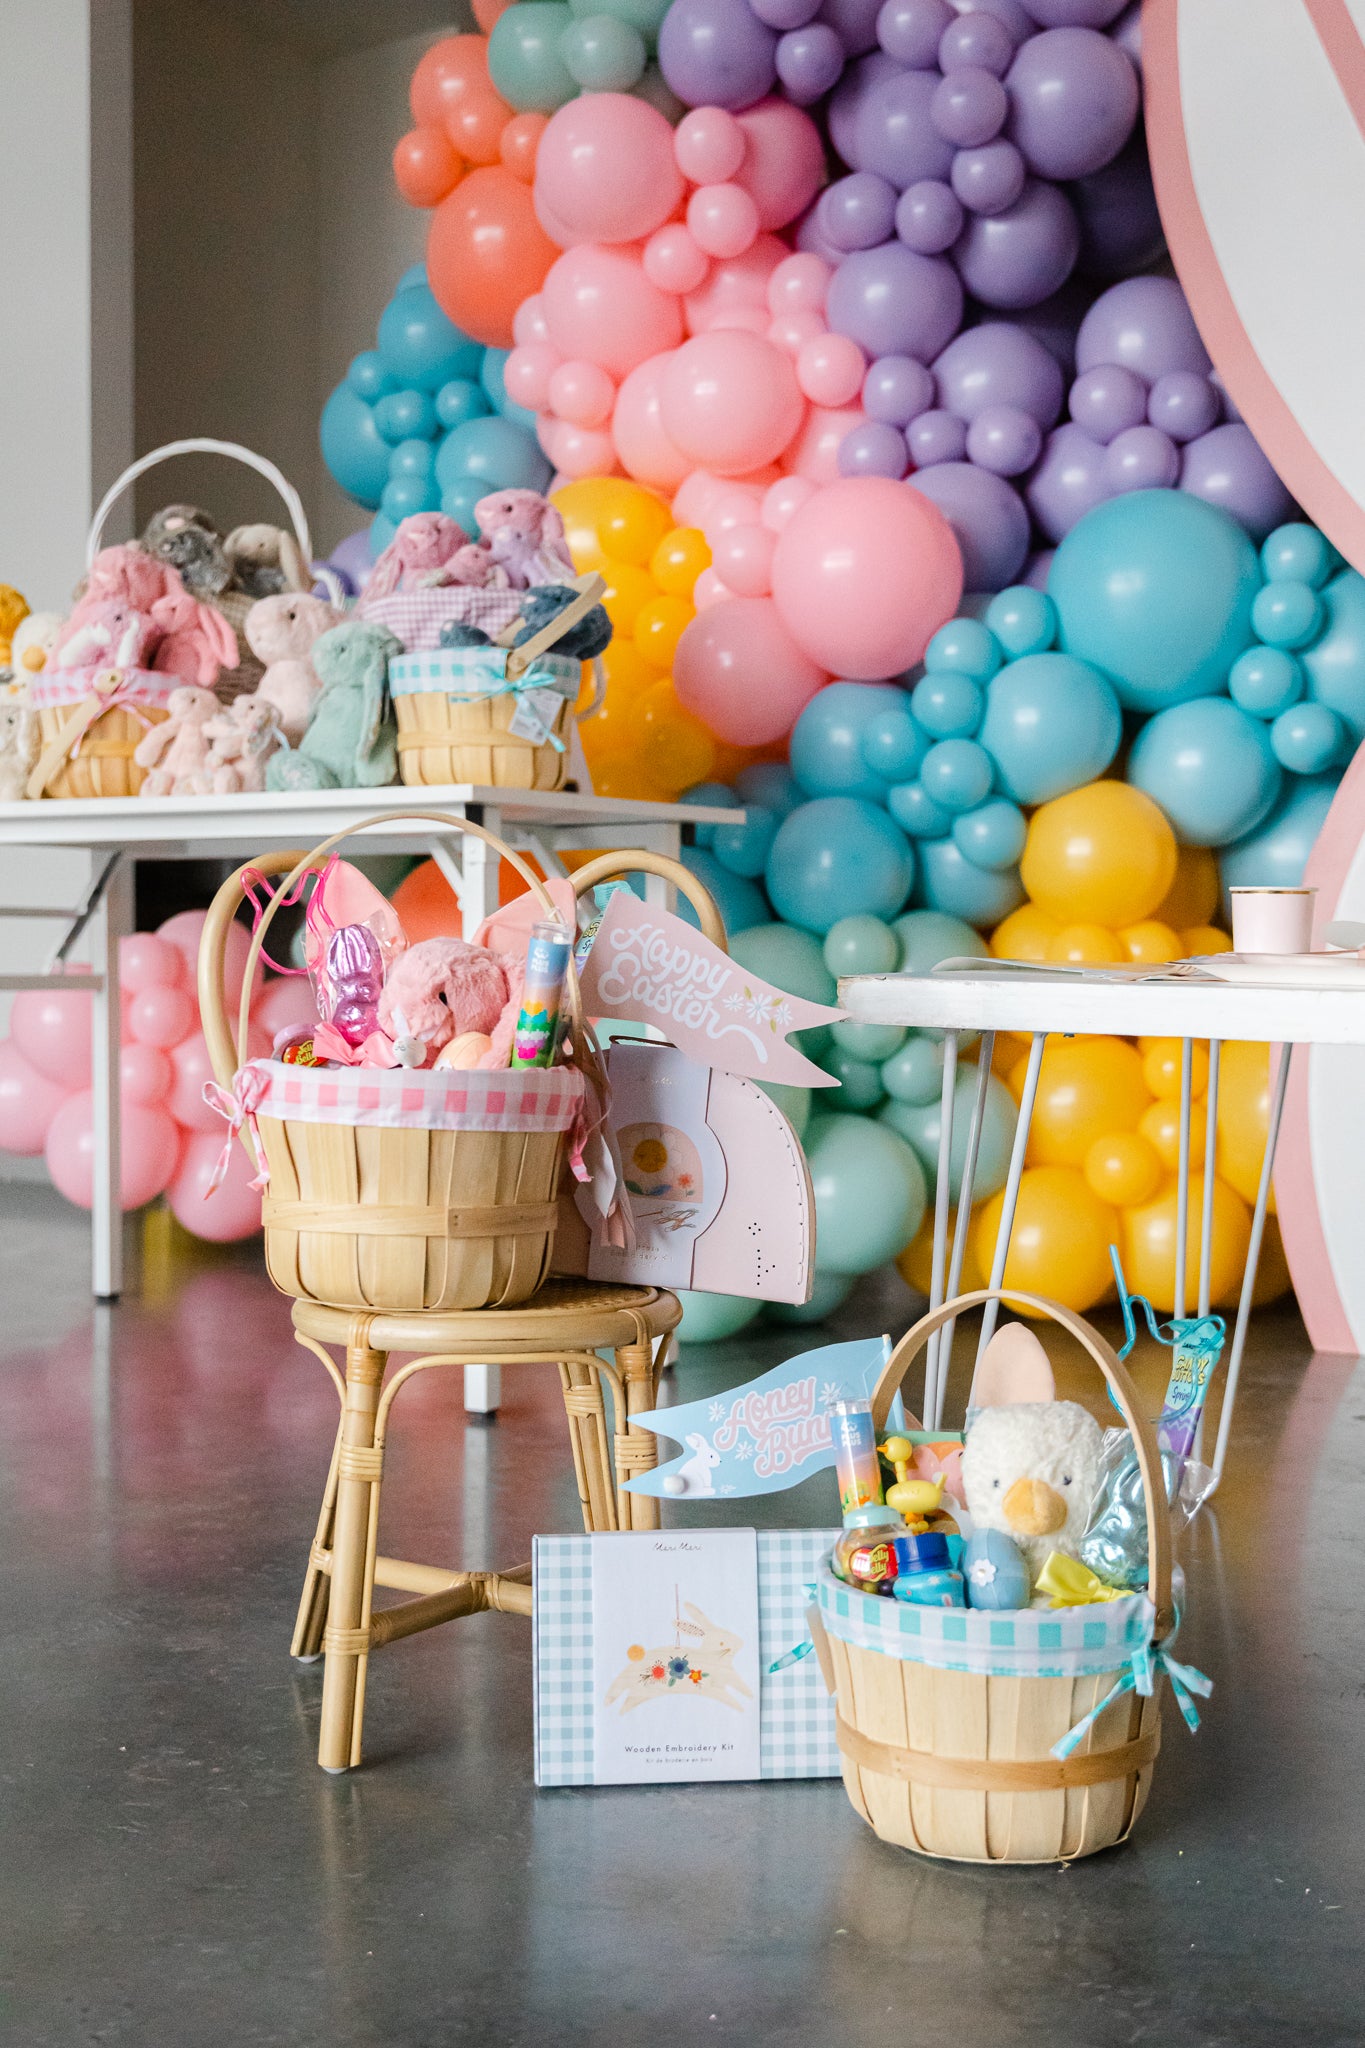 Easter basket ideas for kids in cute gingham Easter baskets.